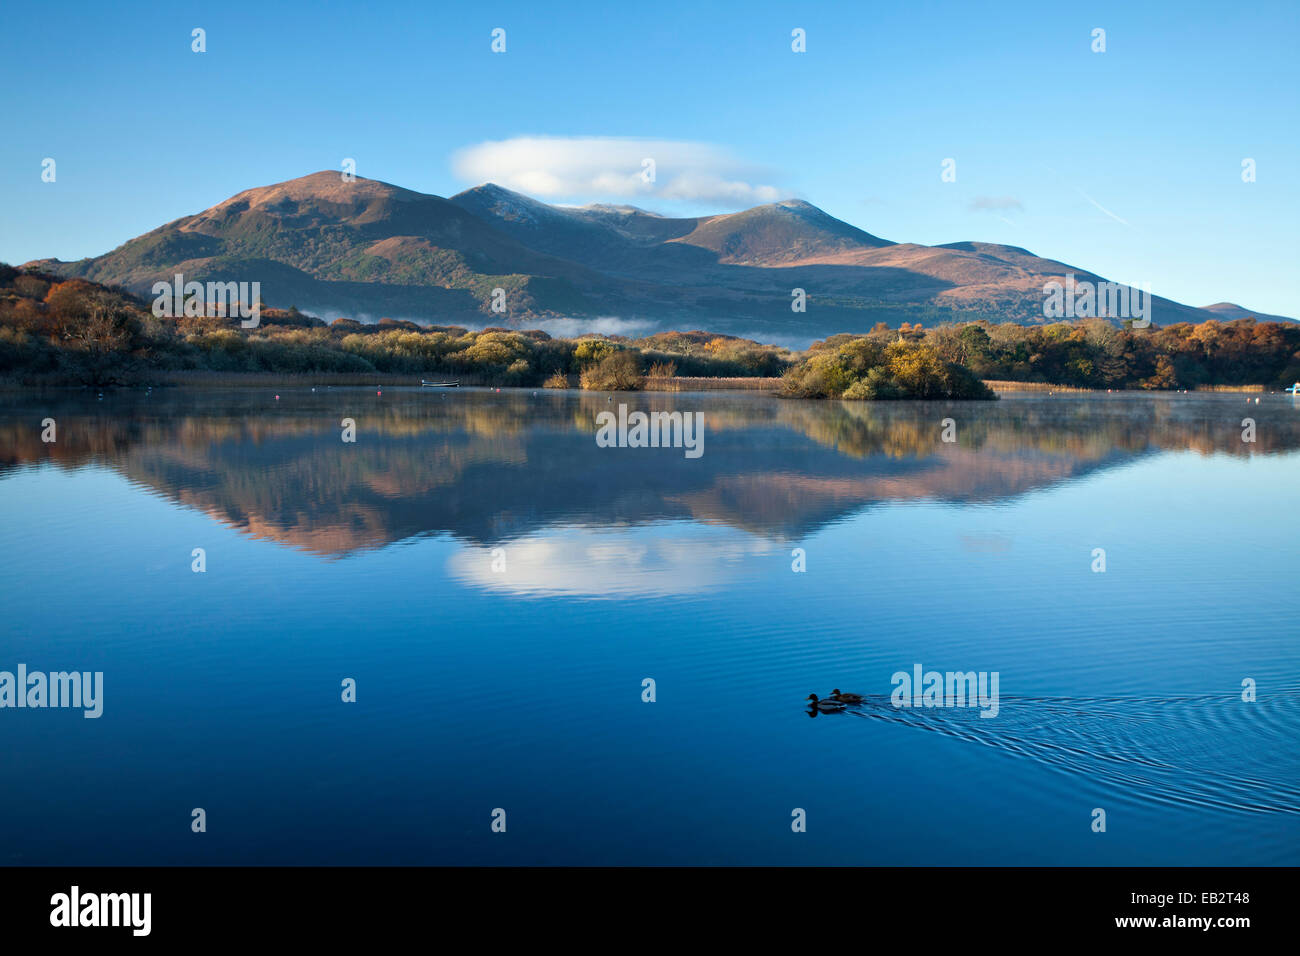 The MacGillycuddy's Reeks mountains reflected in Lough Leane, Killarney National Park, County Kerry, Ireland. Stock Photo